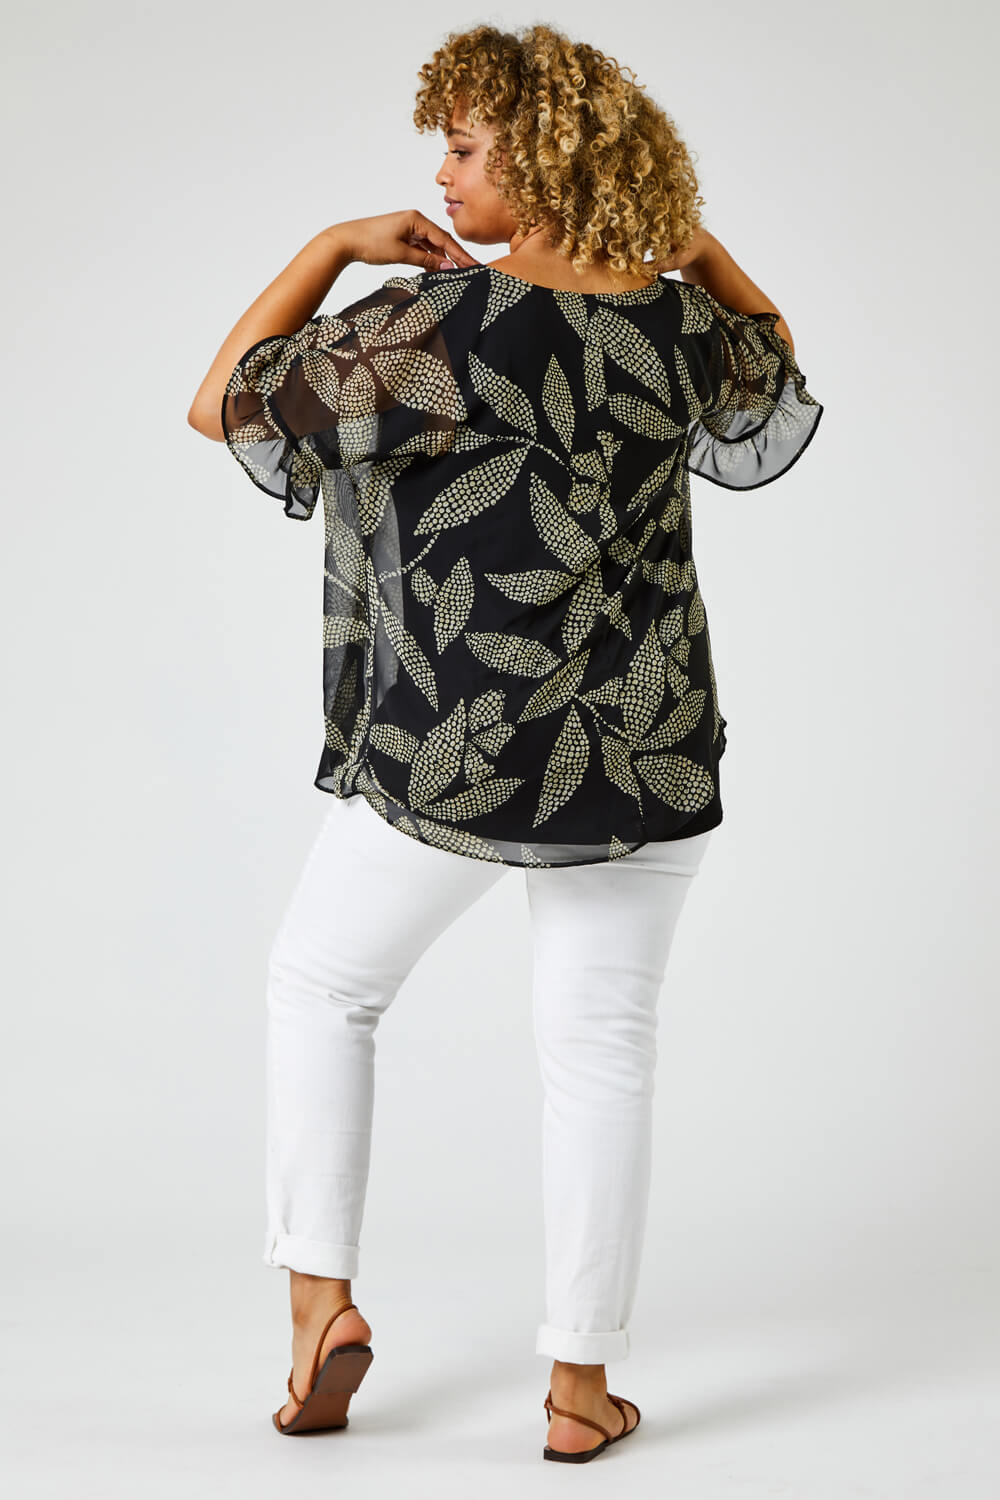 Black Curve Abstract Leaf Print Chiffon Overlay Top, Image 2 of 6